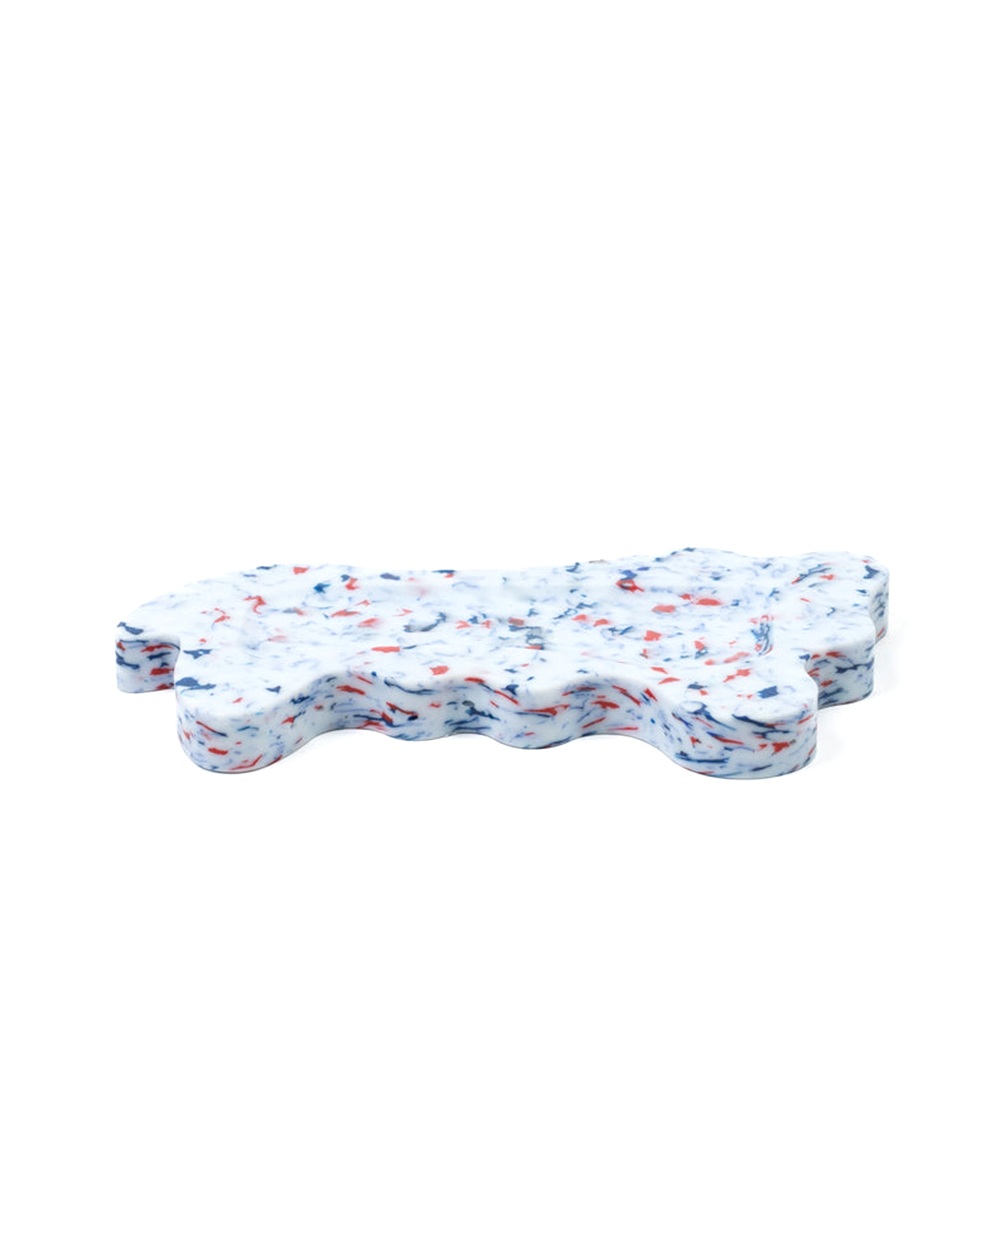 Melted Structures Desk Tray - White Multi